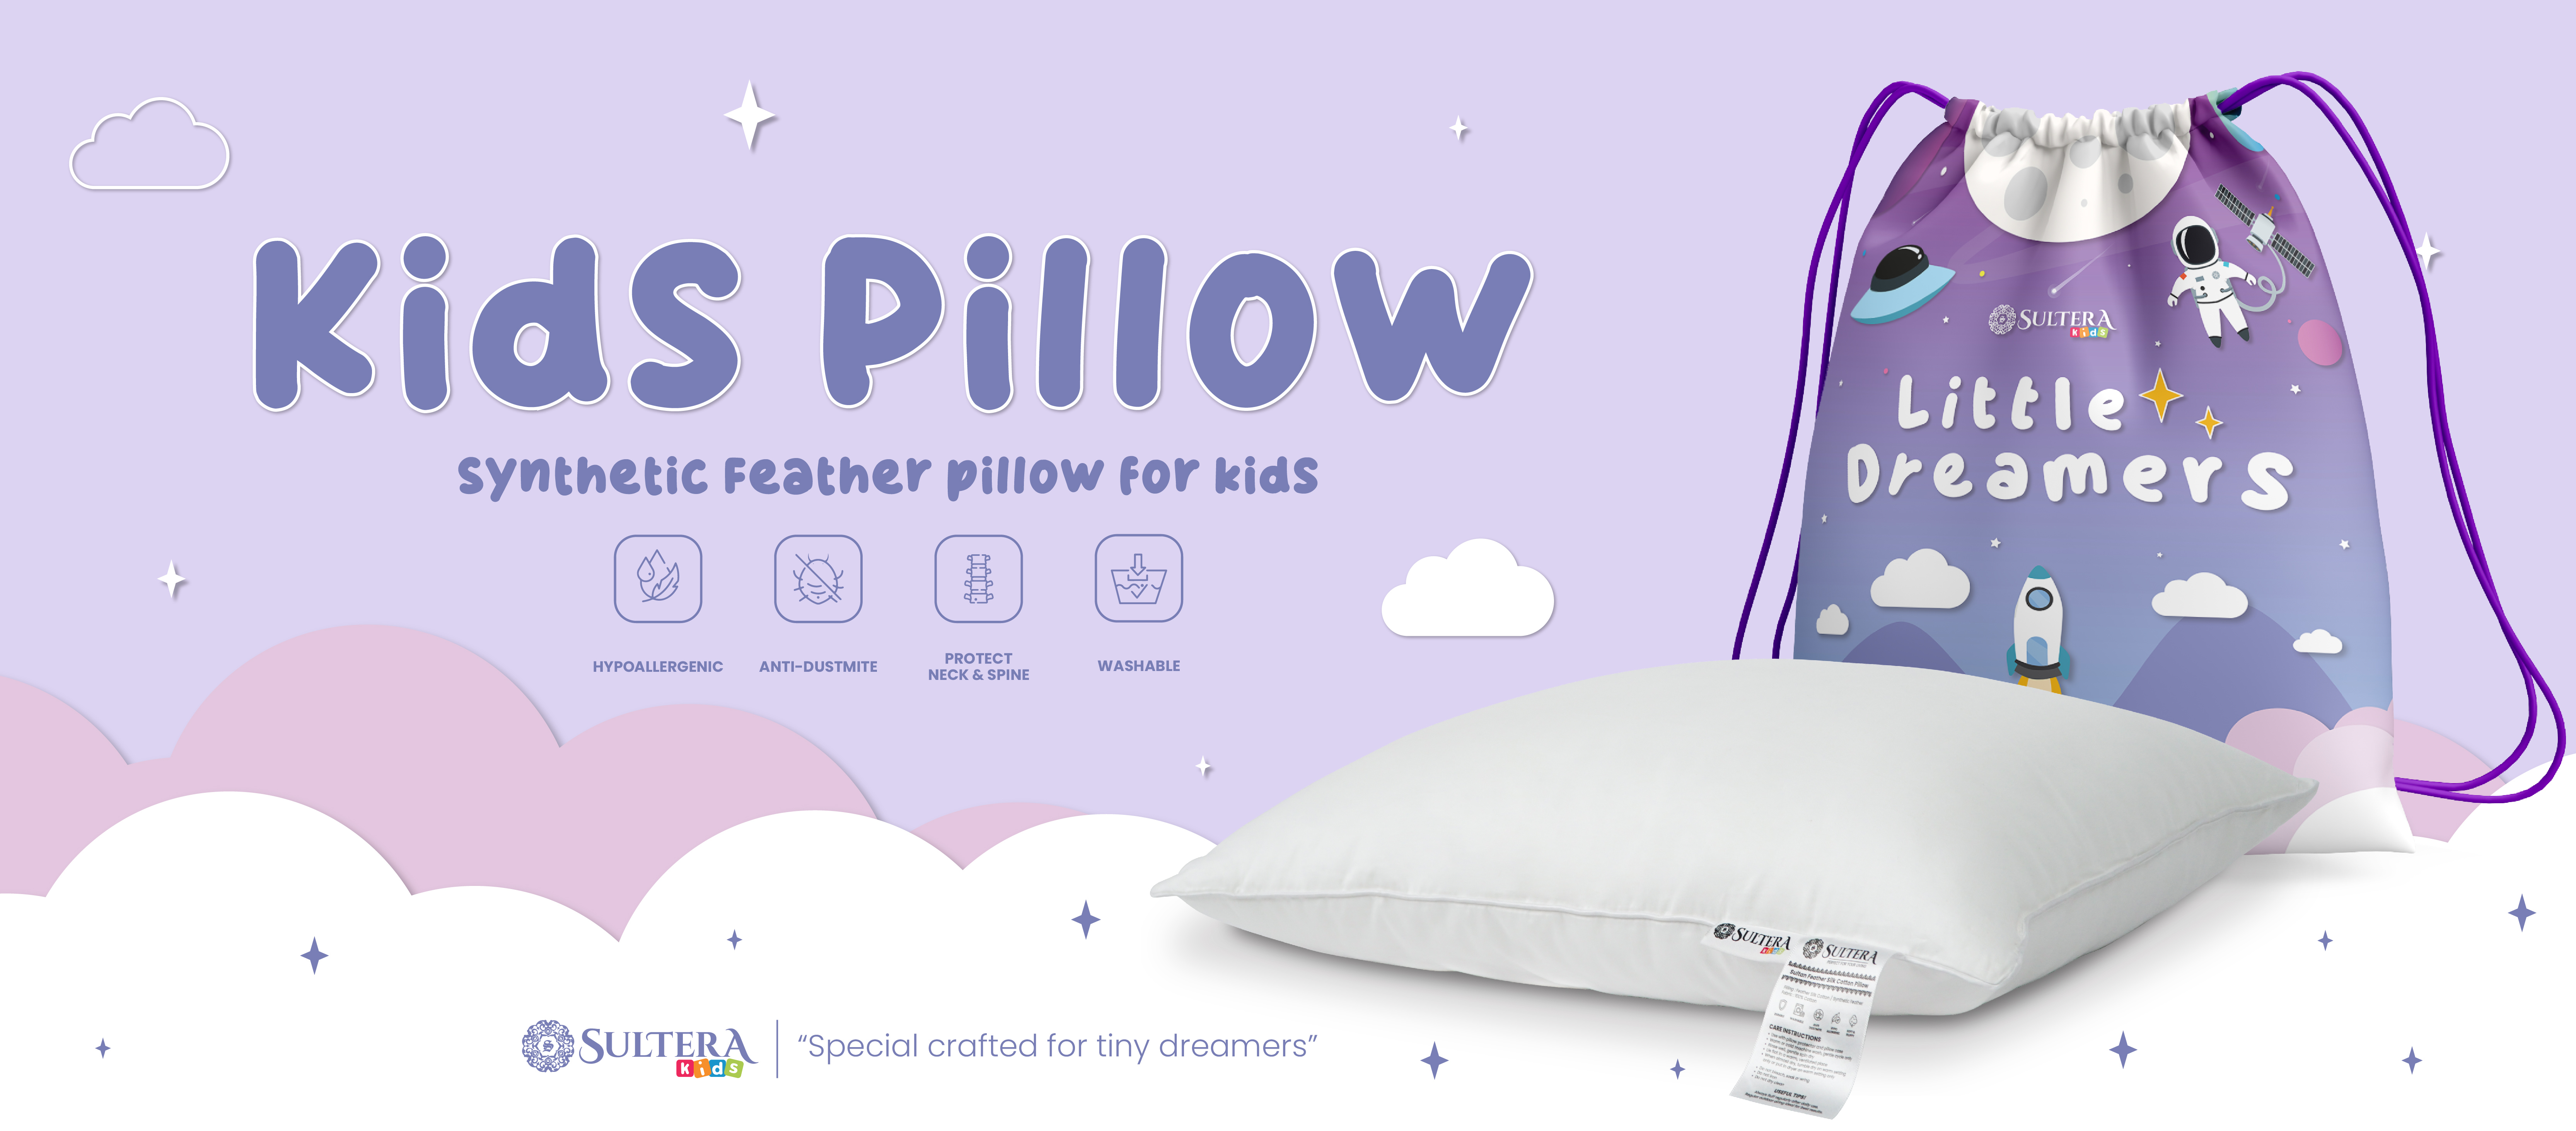 KIDS PILLOW | SulteraXclusive